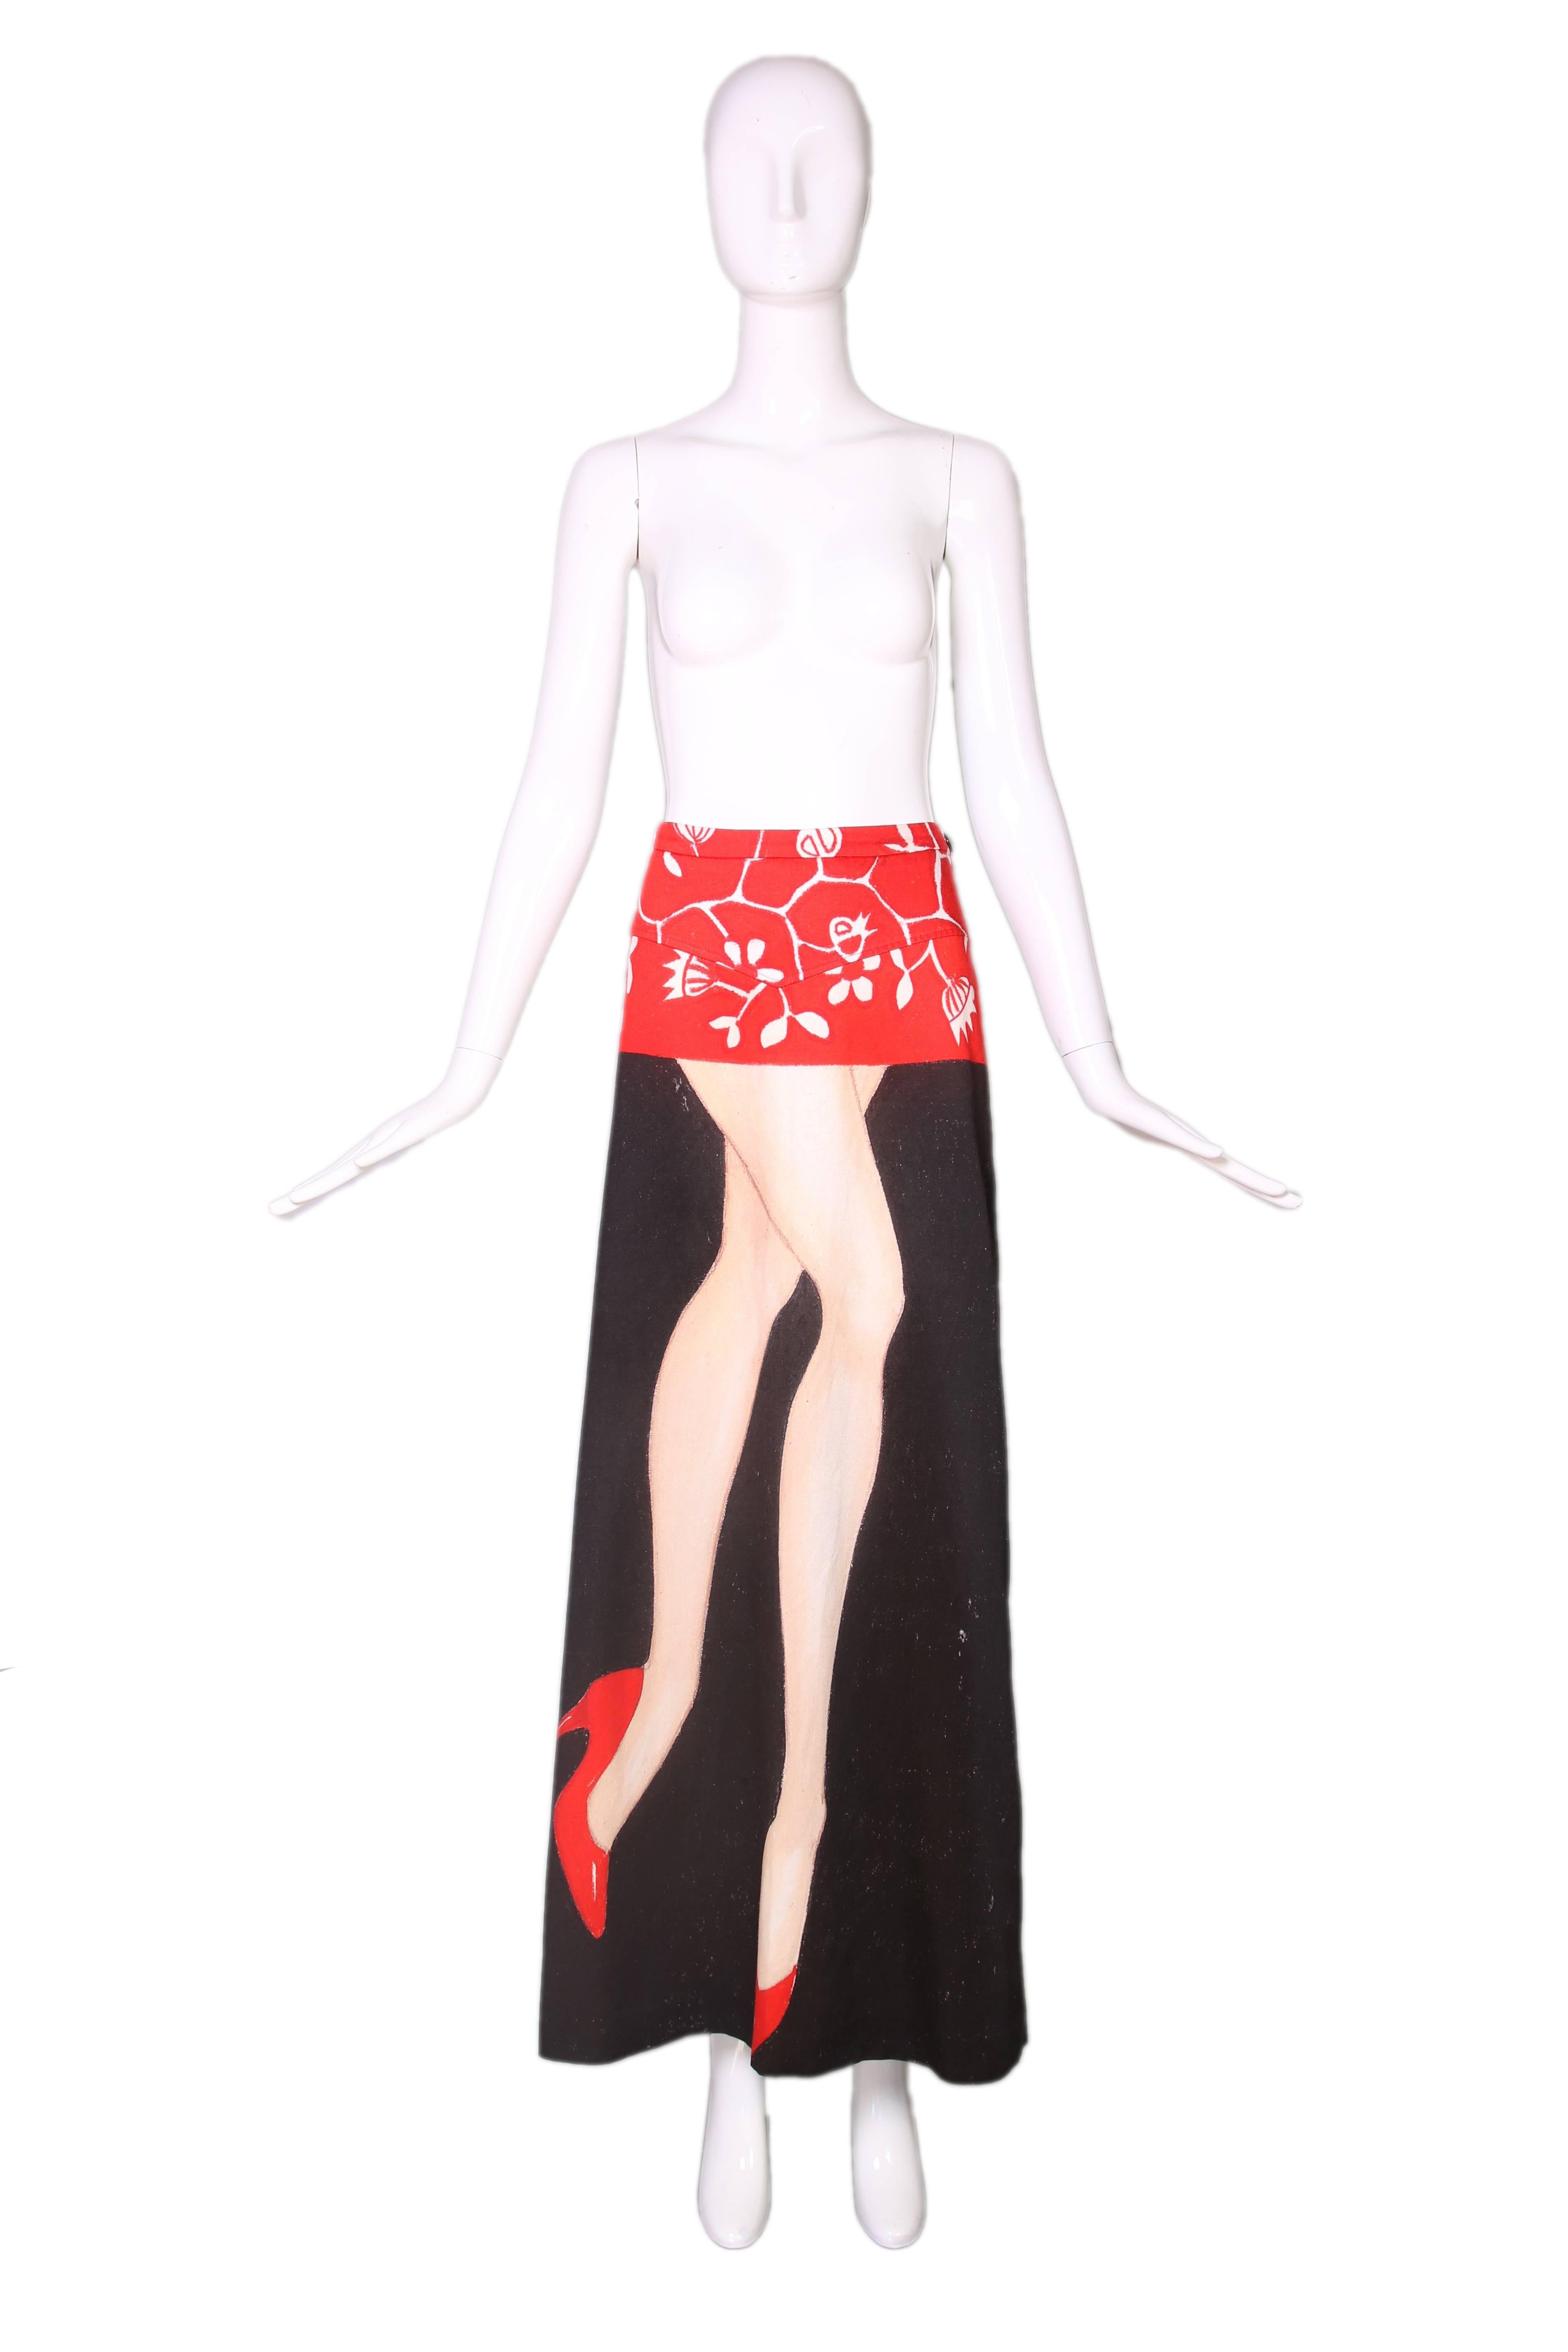 2008 Dirk Van Saene of Antwerp Six black & red cotton maxi skirt with red and white floral design at the top, and woman's legs down the front. Long kick pleat at back hem. Signed by Dirk Van Saene. In excellent condition. Size EU